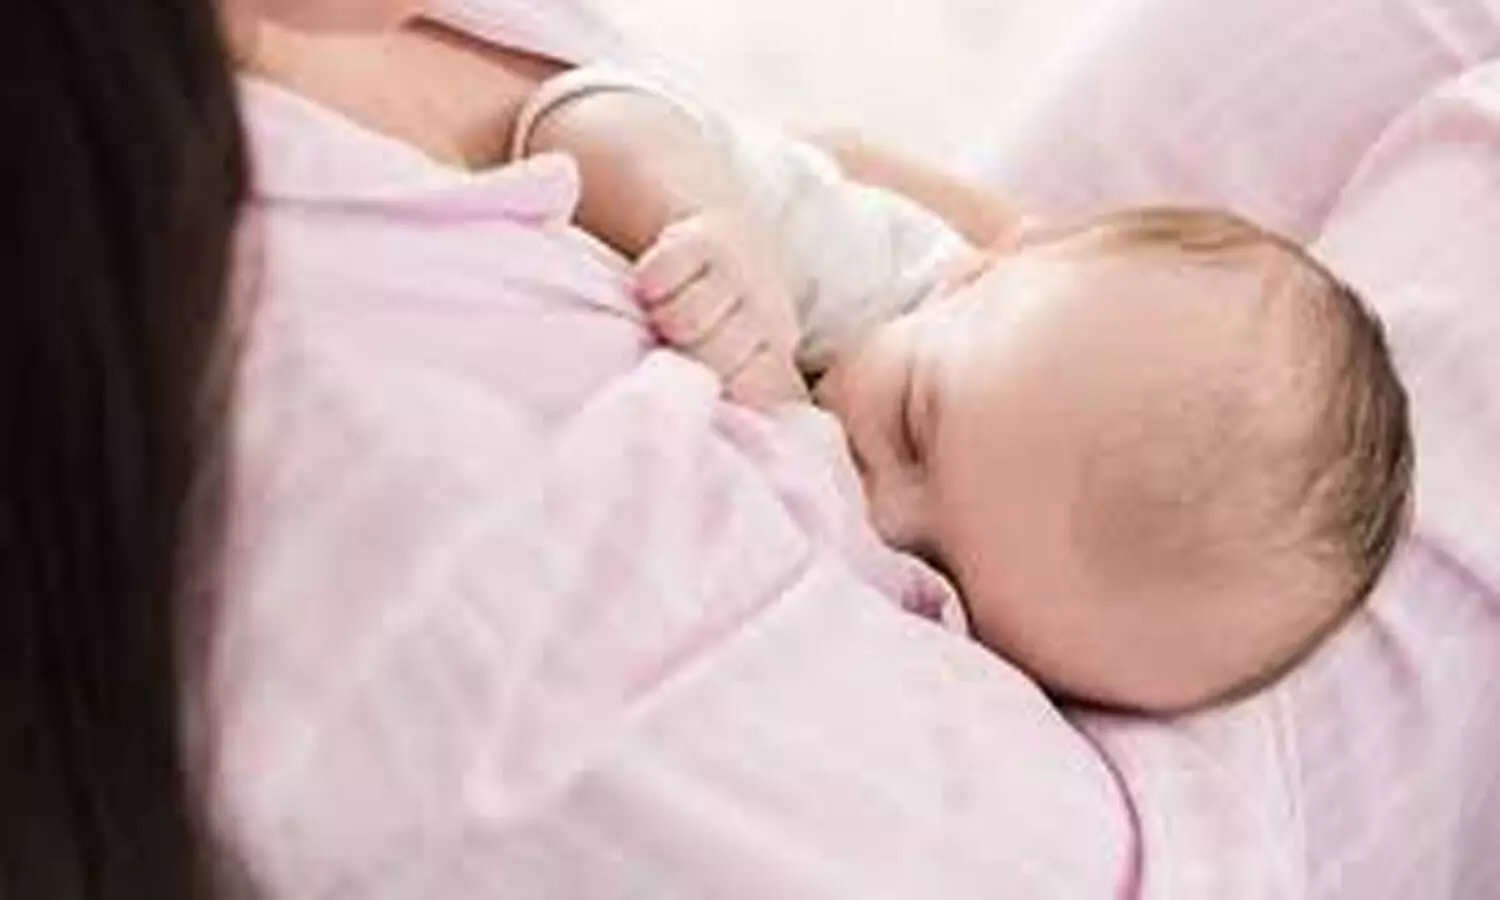 Breastfeeding in early infancy decreases risk of allergies and asthma